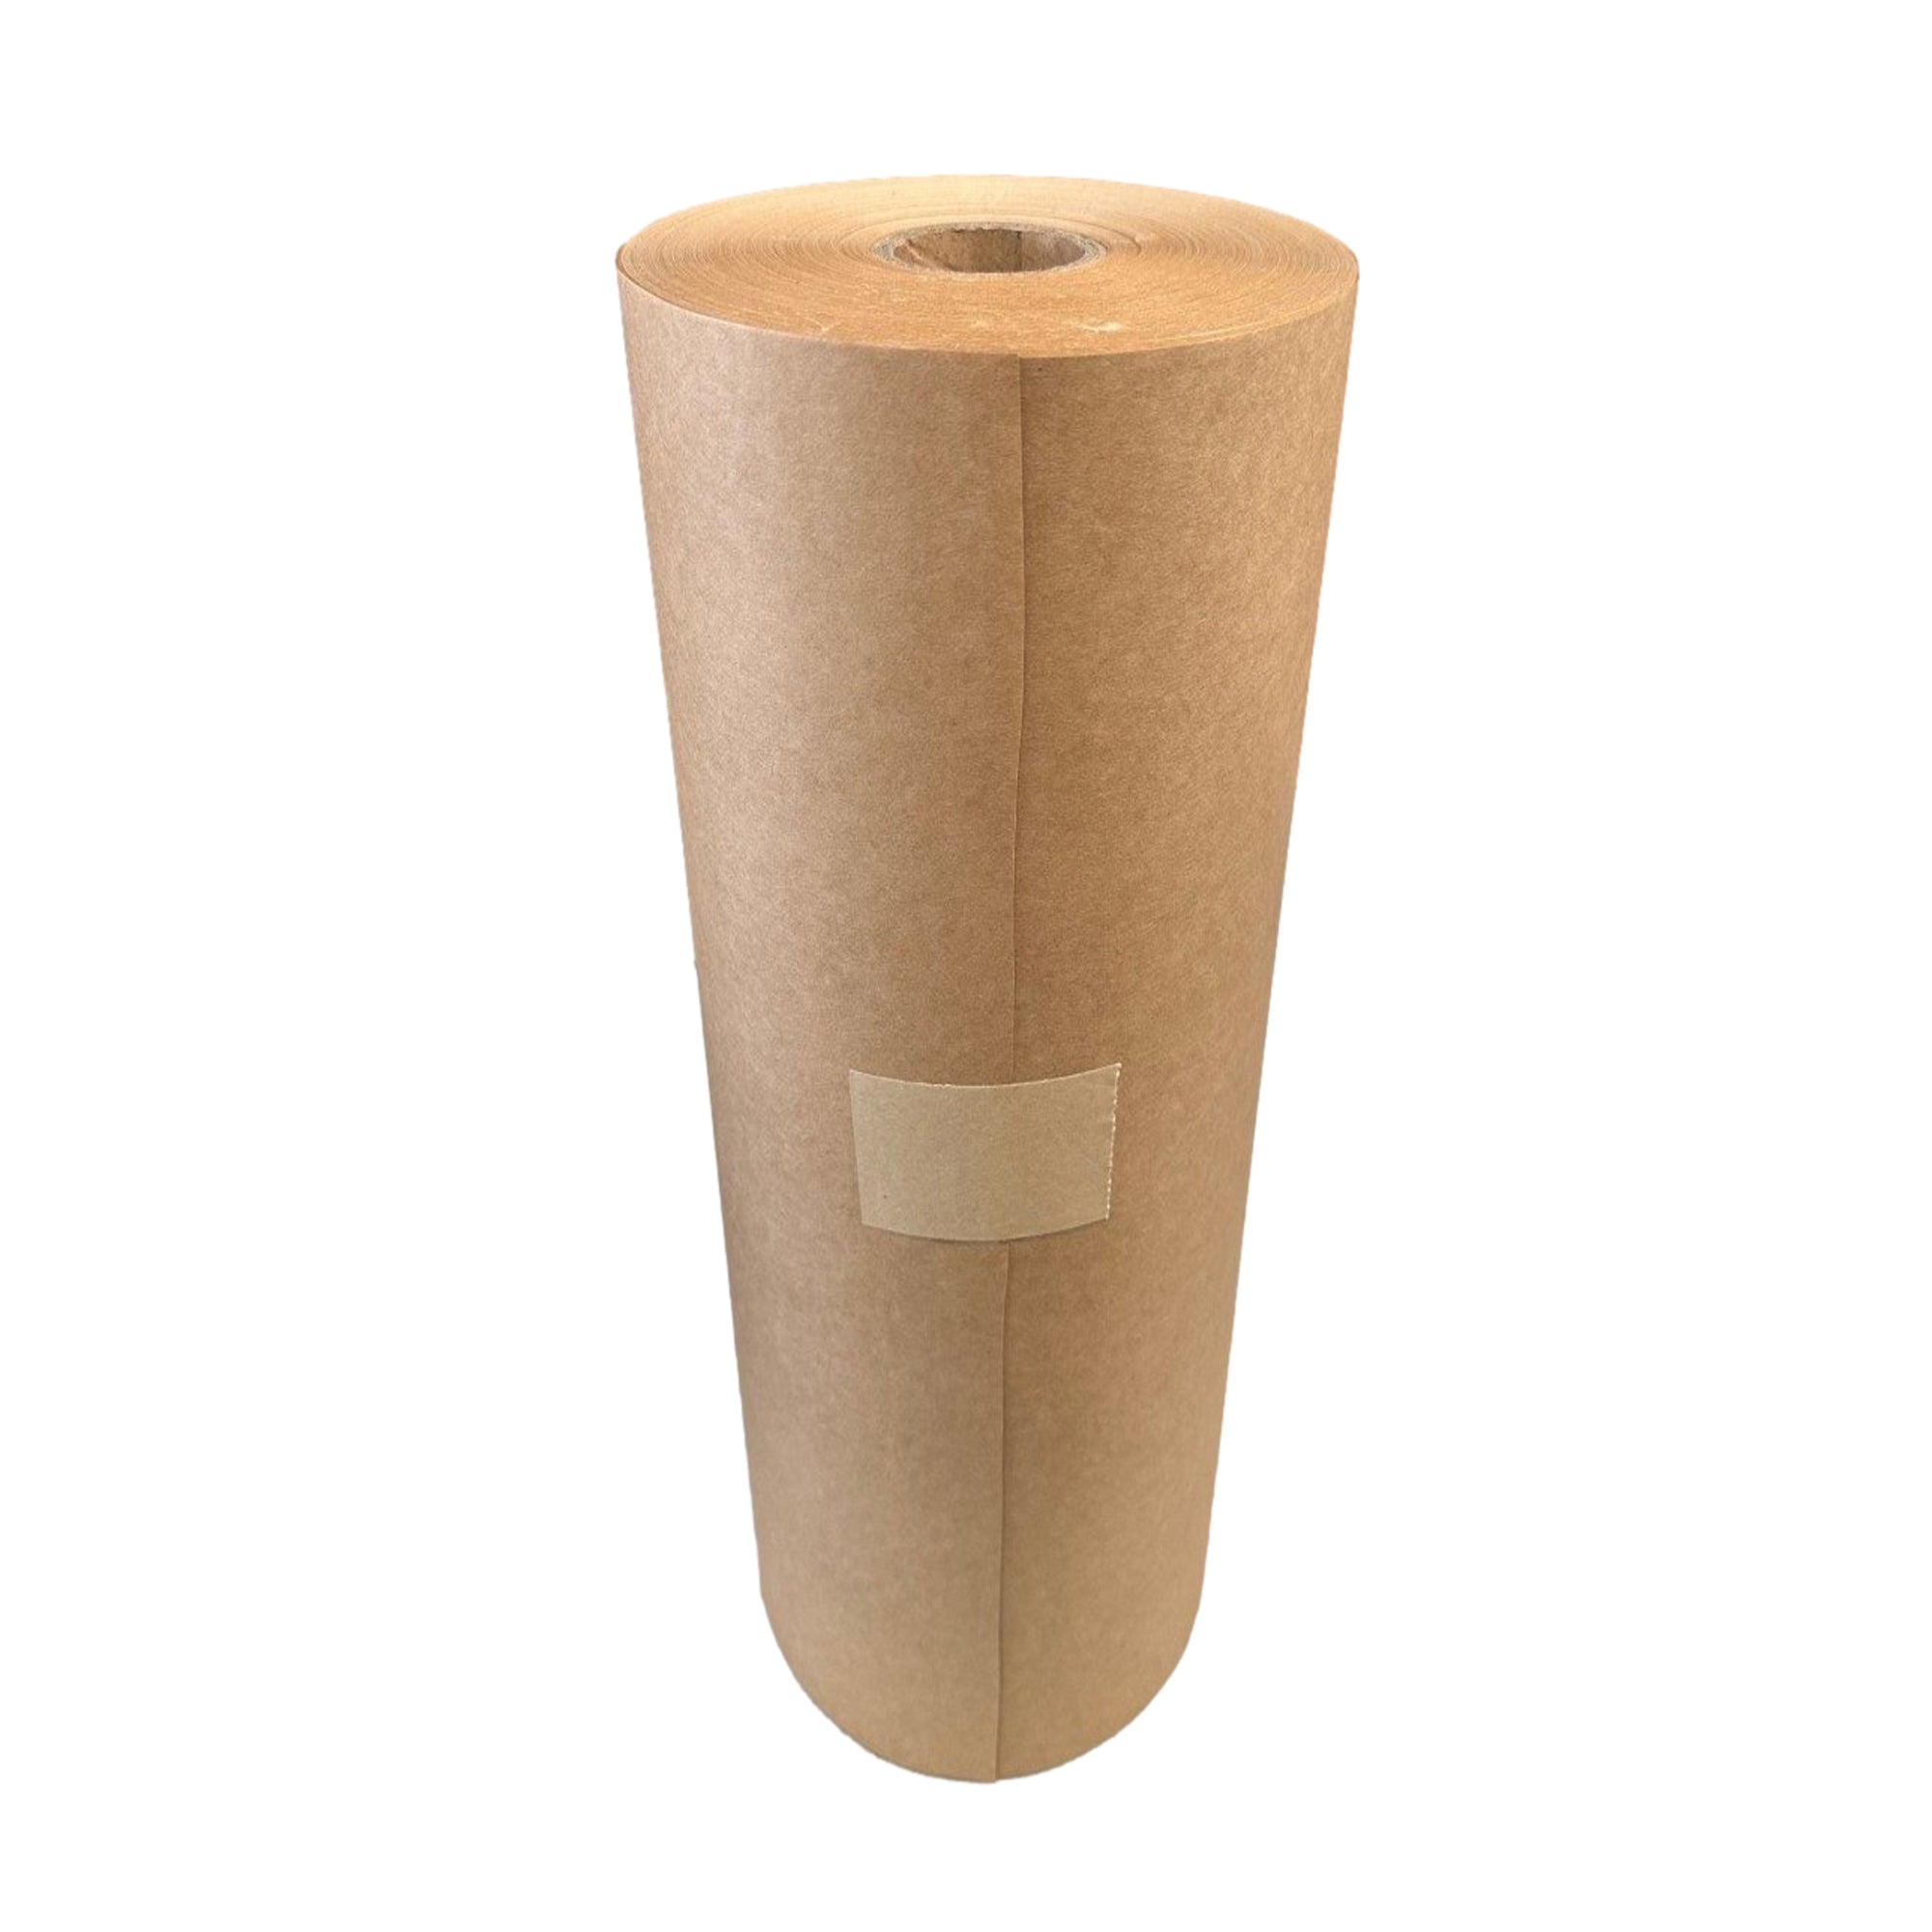 Brown Heavy Duty Craft Paper Roll 900mm x 50m, Paper